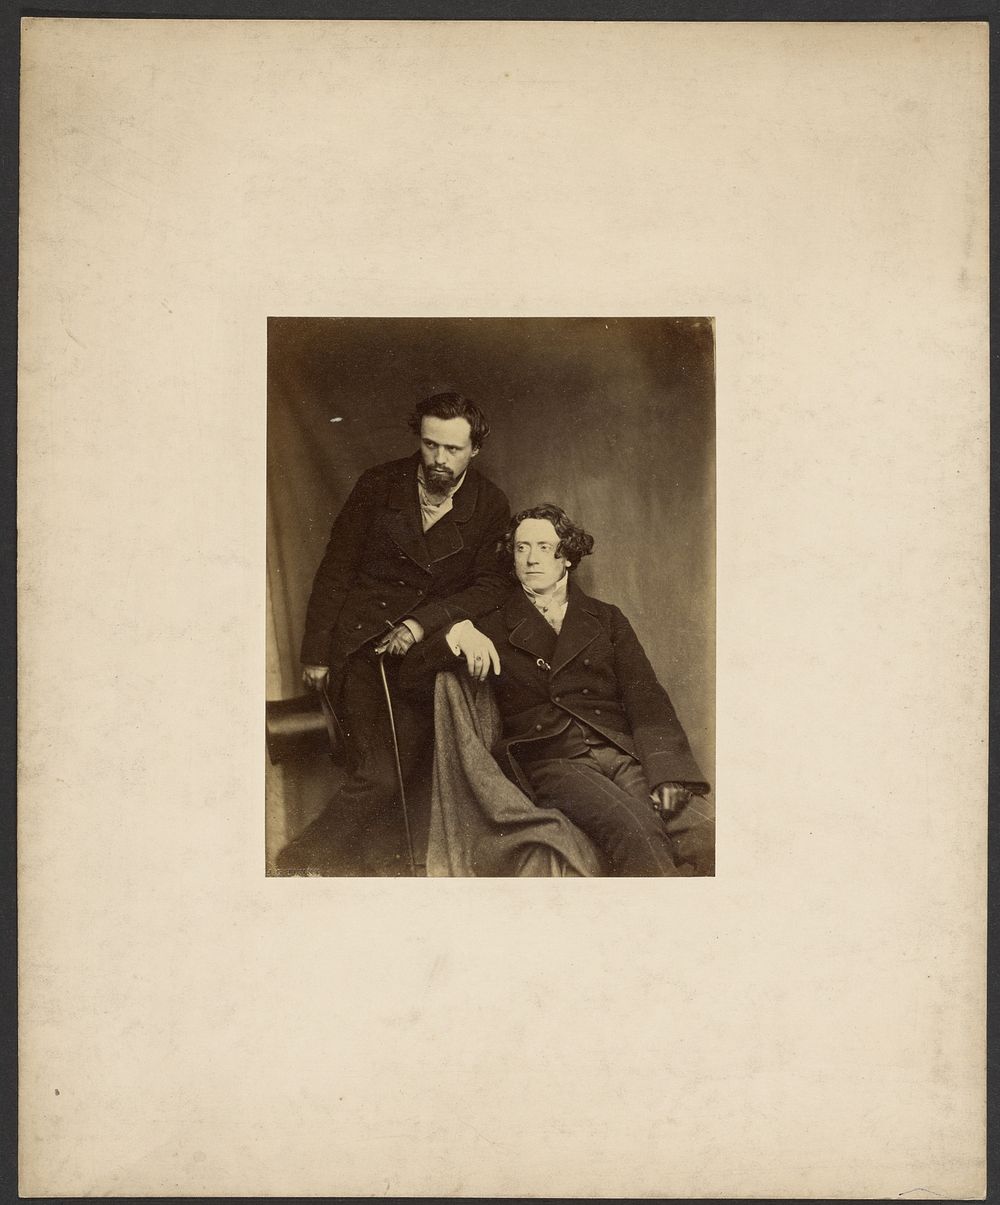 Waller Paton and Joseph Noel Paton by James G Tunny